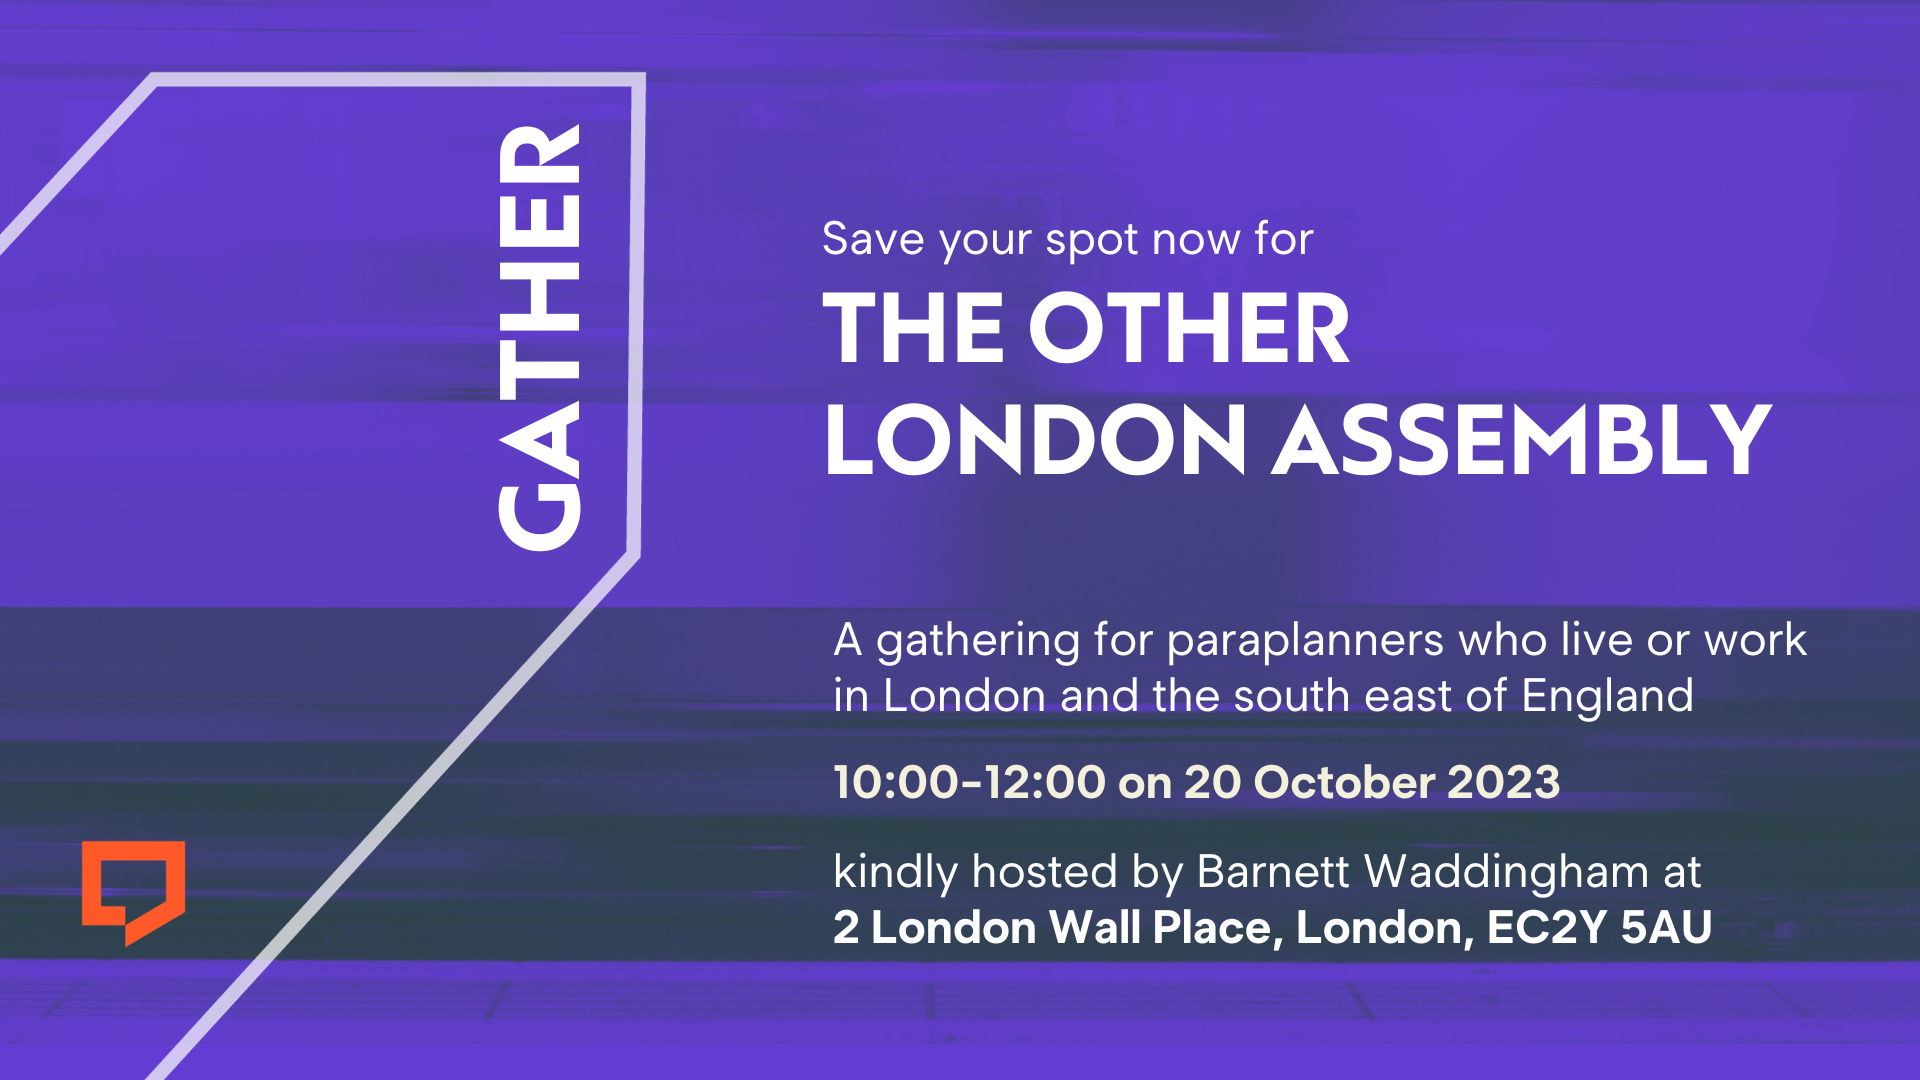 Save your spot now for The Other London Assembly. A gathering for paraplanners who live or work in London and the south east of England. 10:00-12:00 on 20 October 2023. Kindly hosted by Barnett Waddingham at 2 London Wall Place, London, EC2Y 5AU